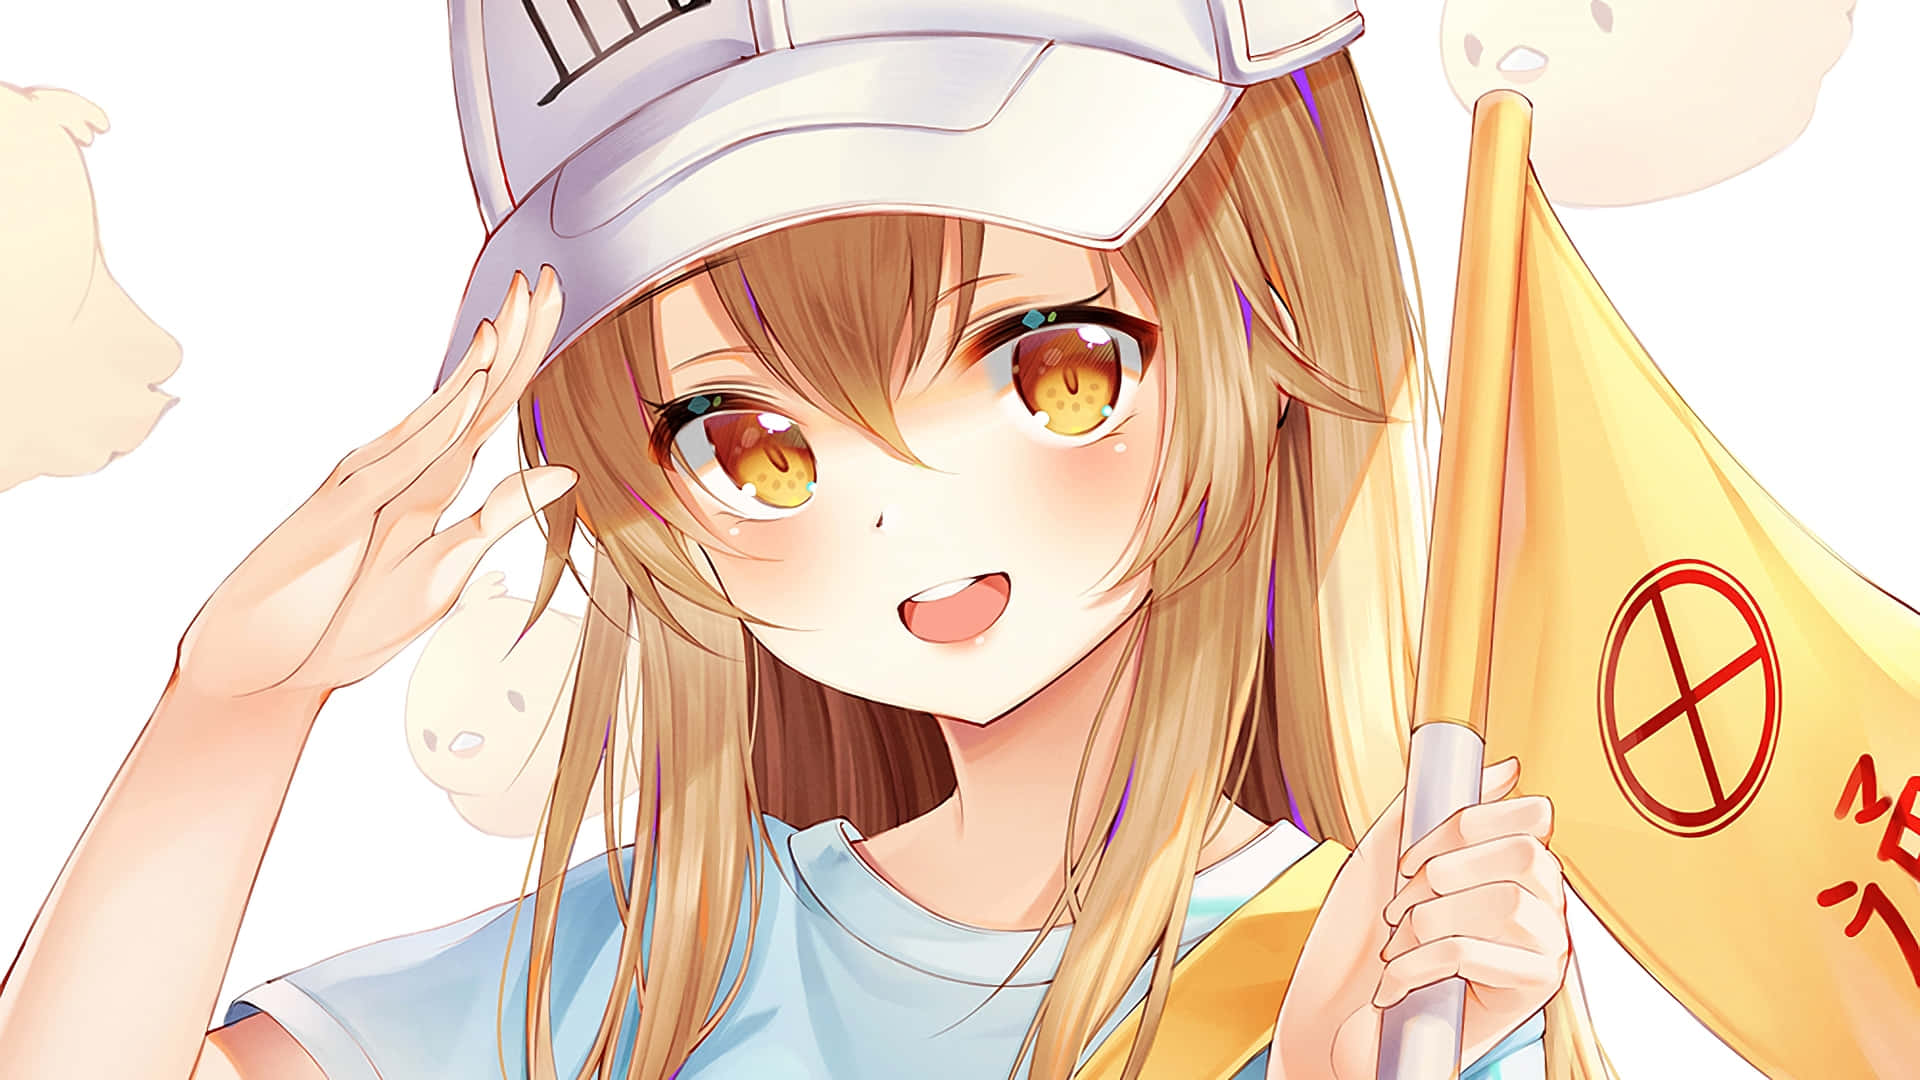 A Delightful Scene From Cells At Work Featuring The Adorable Platelet Characters Wallpaper